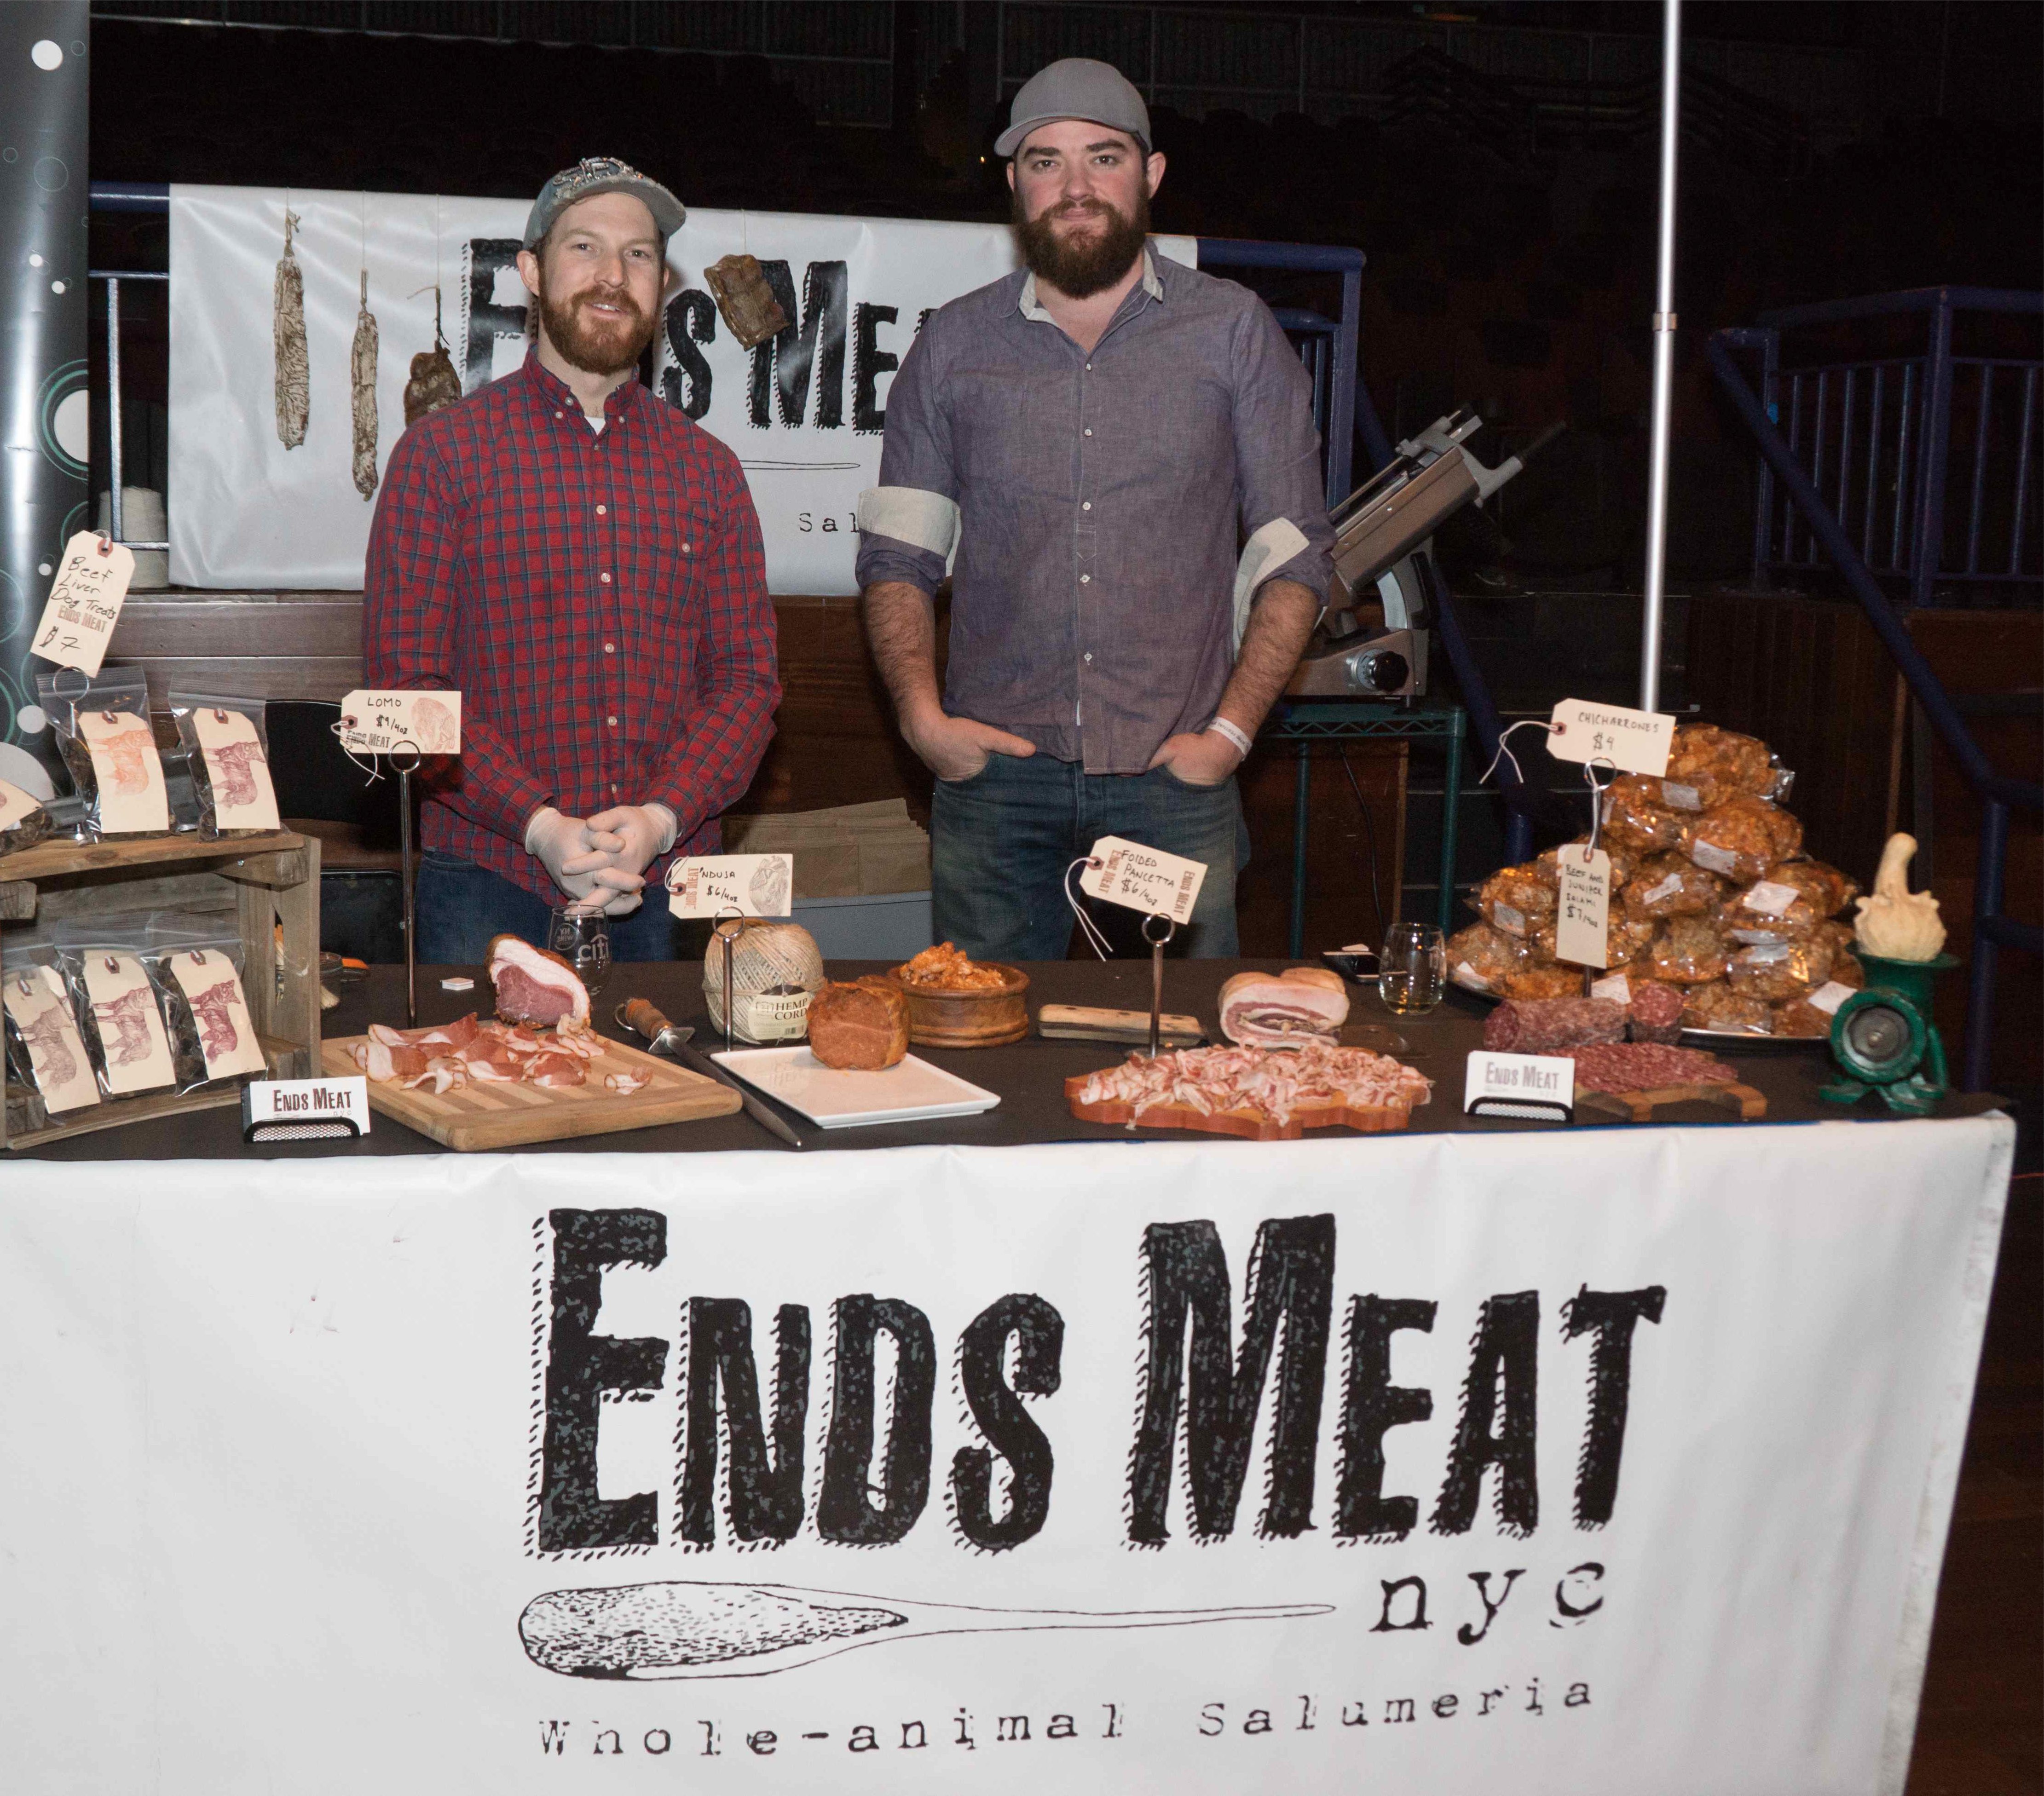 Artisan food makers from NYC and beyond will be sampling and selling their offerings at the Brooklyn Crush Wine & Artisanal Food Festival on 11/11 and the NYC Autumn Wine Festival on 11/18.